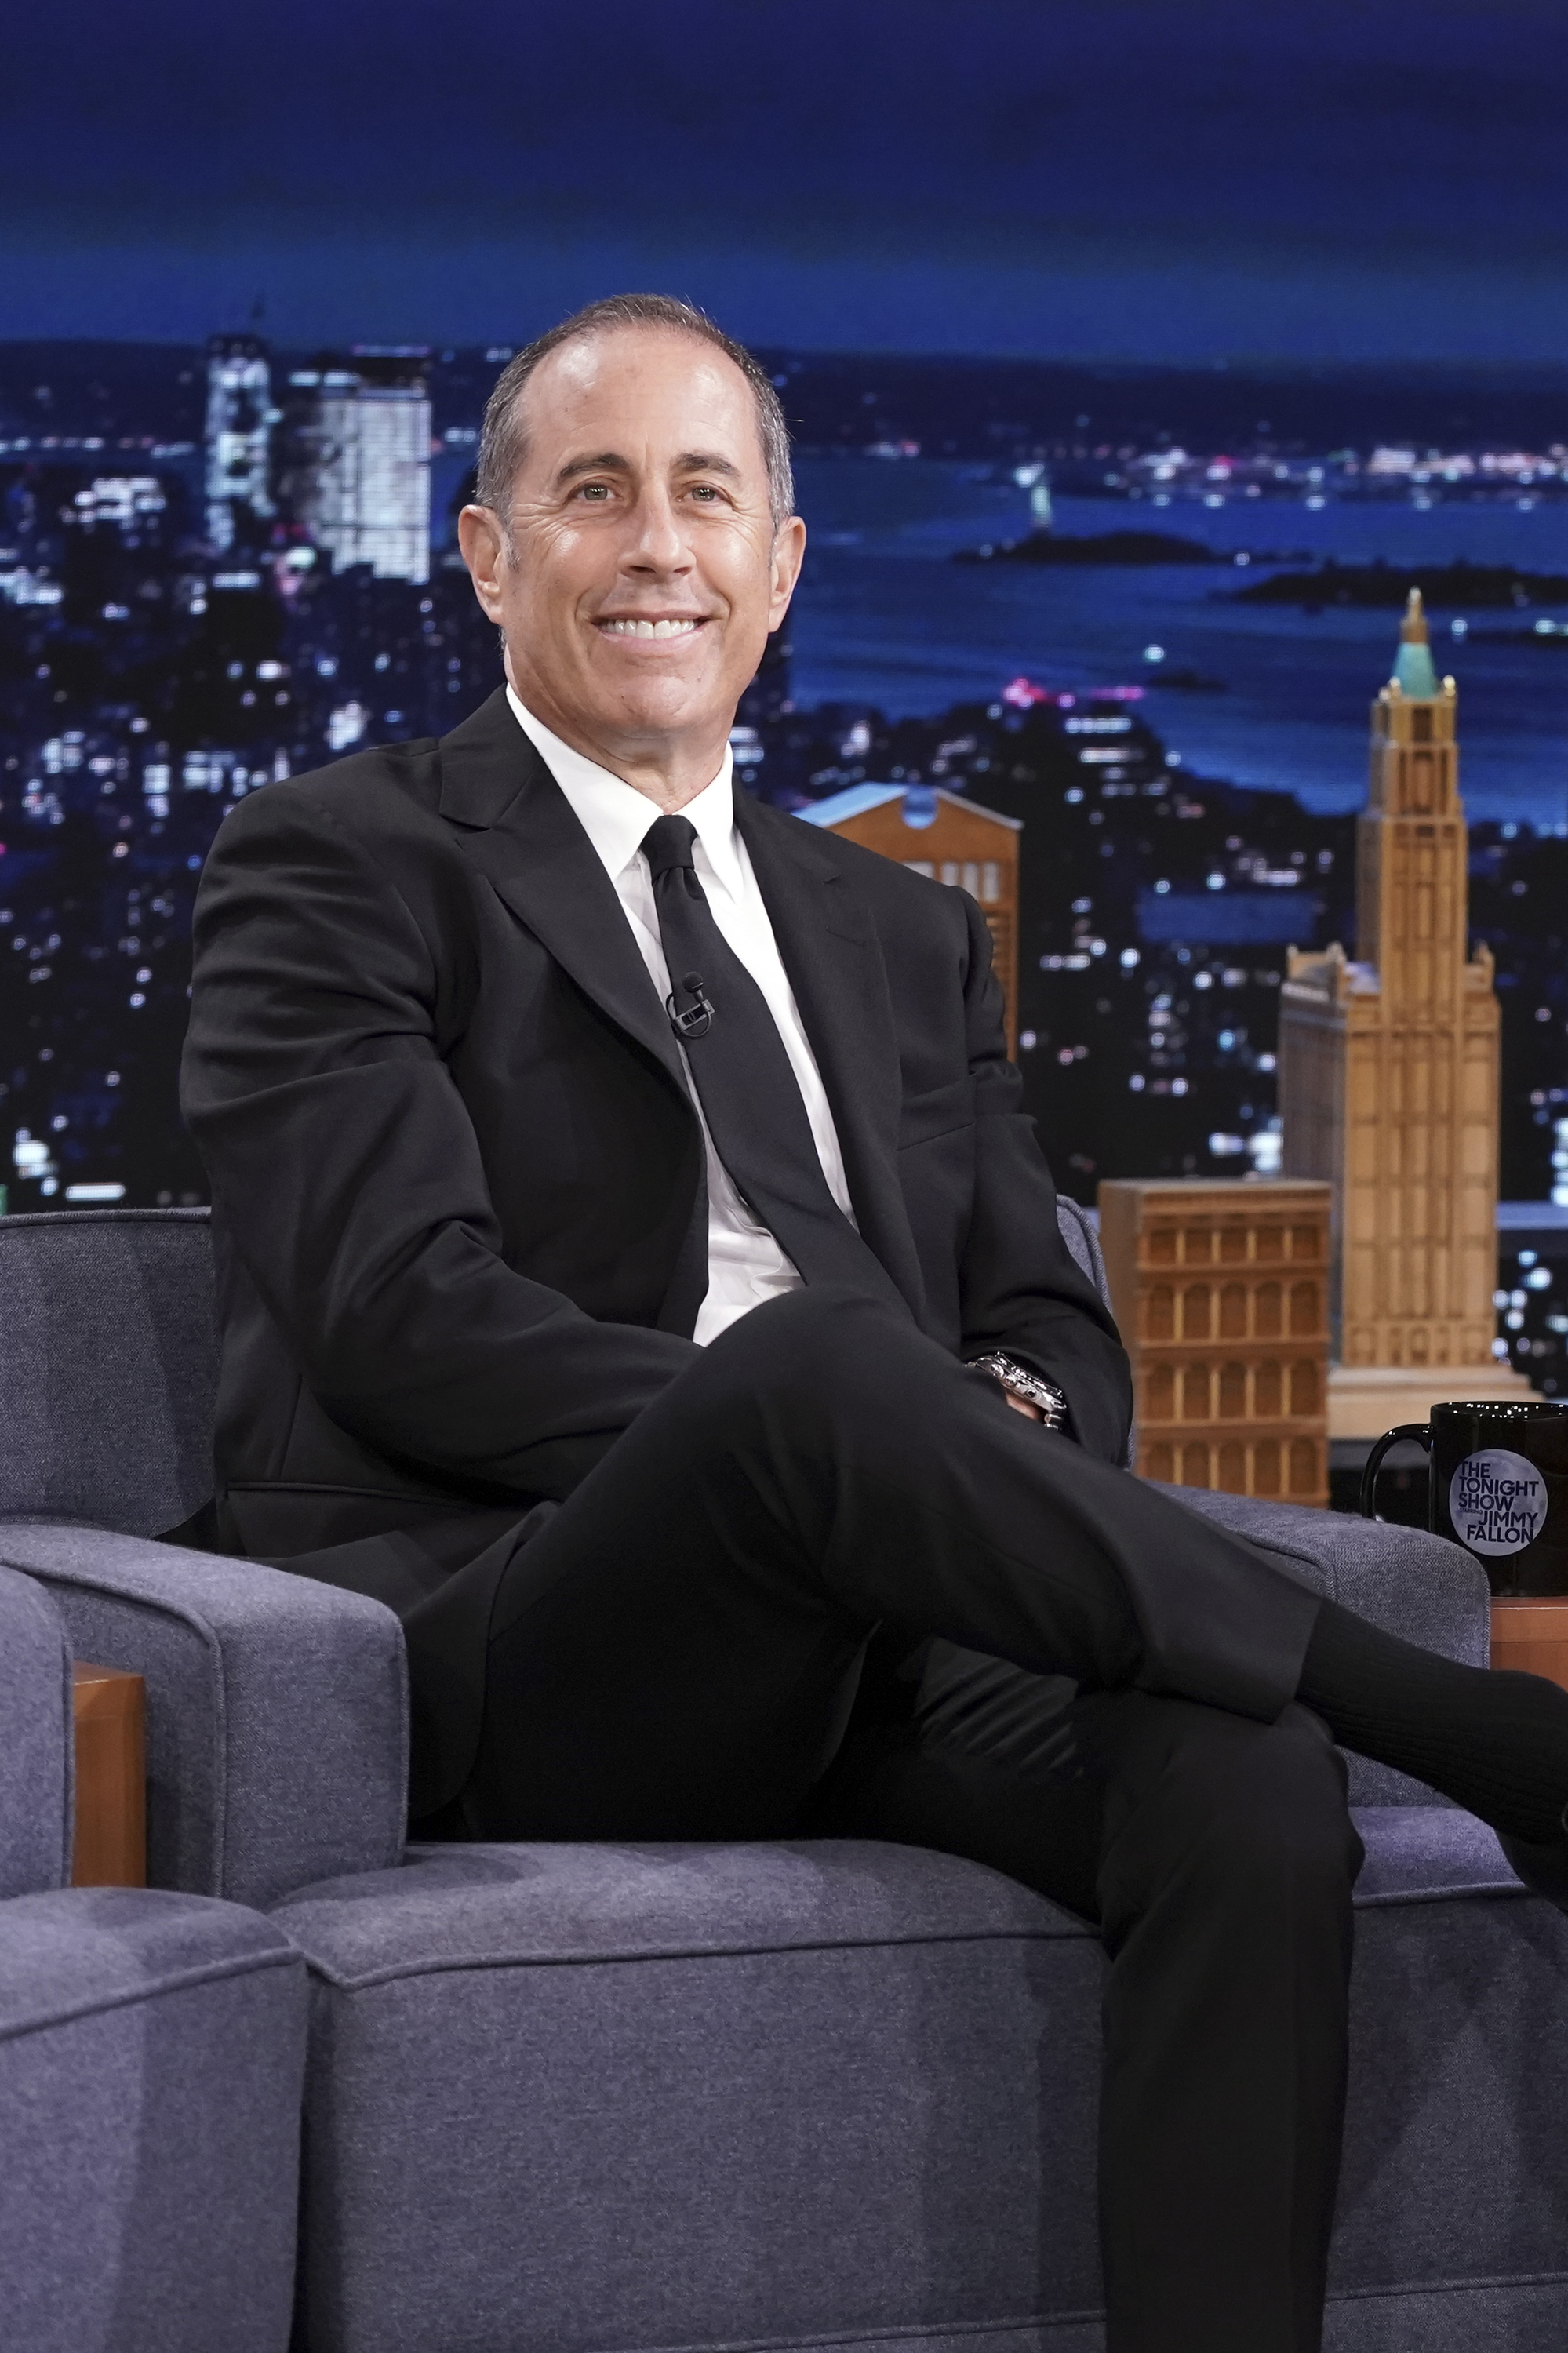 Jerry Seinfeld on "The Tonight Show Starring Jimmy Fallon" on October 1, 2021. | Source: Getty Images